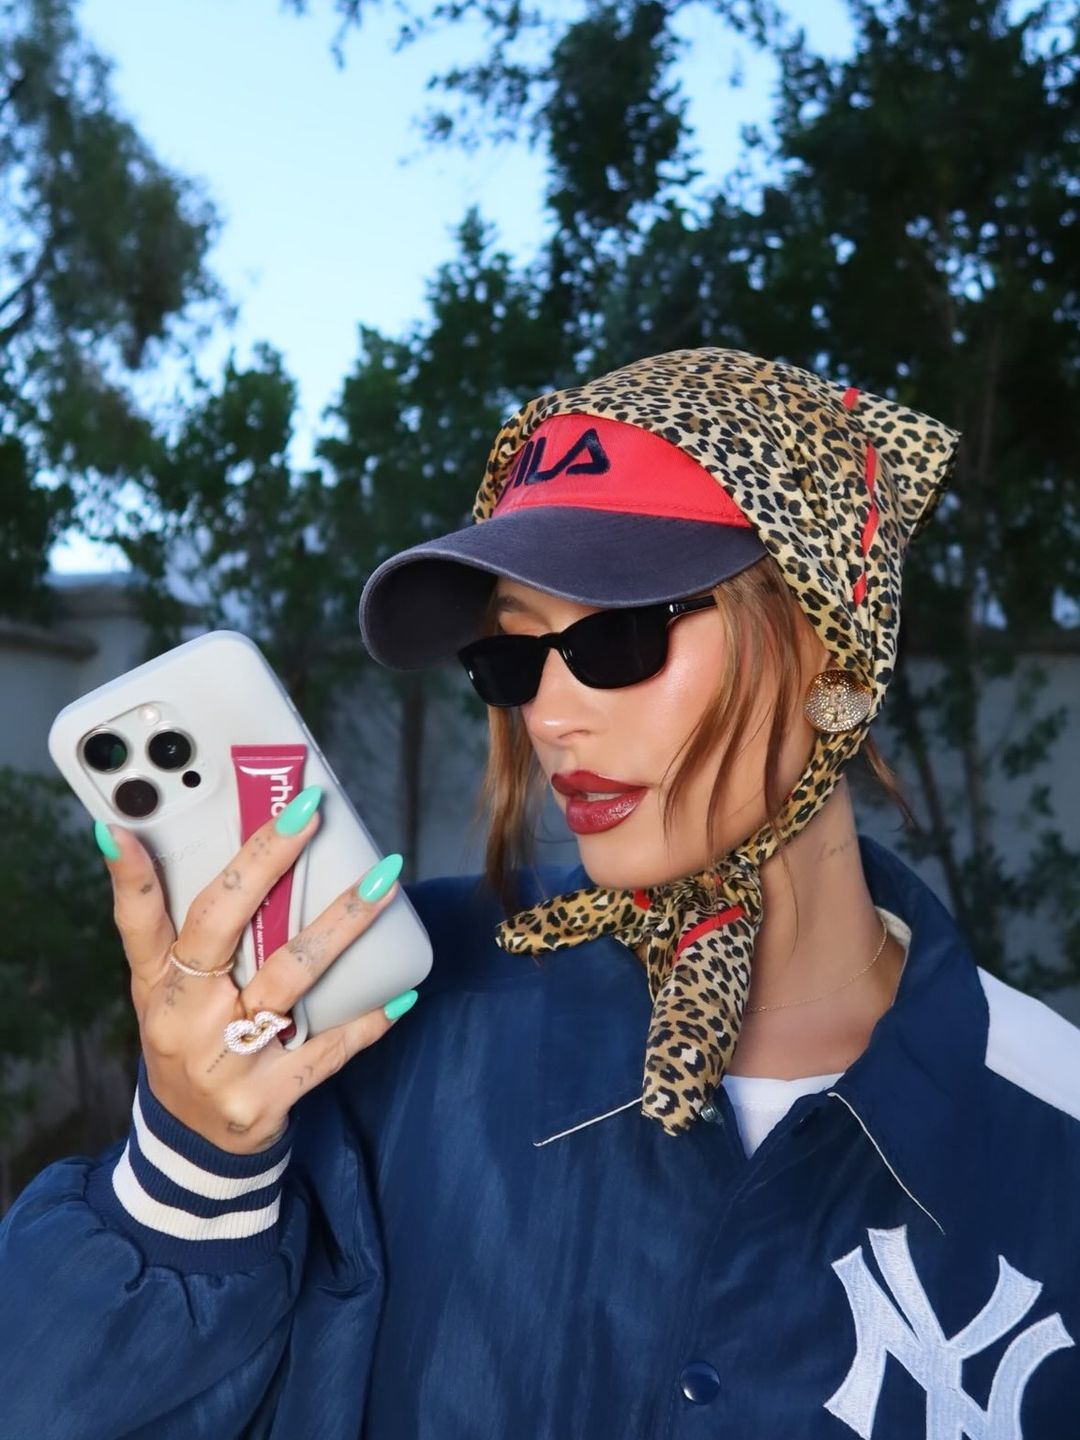 Hailey jumped on the leopard print trend too